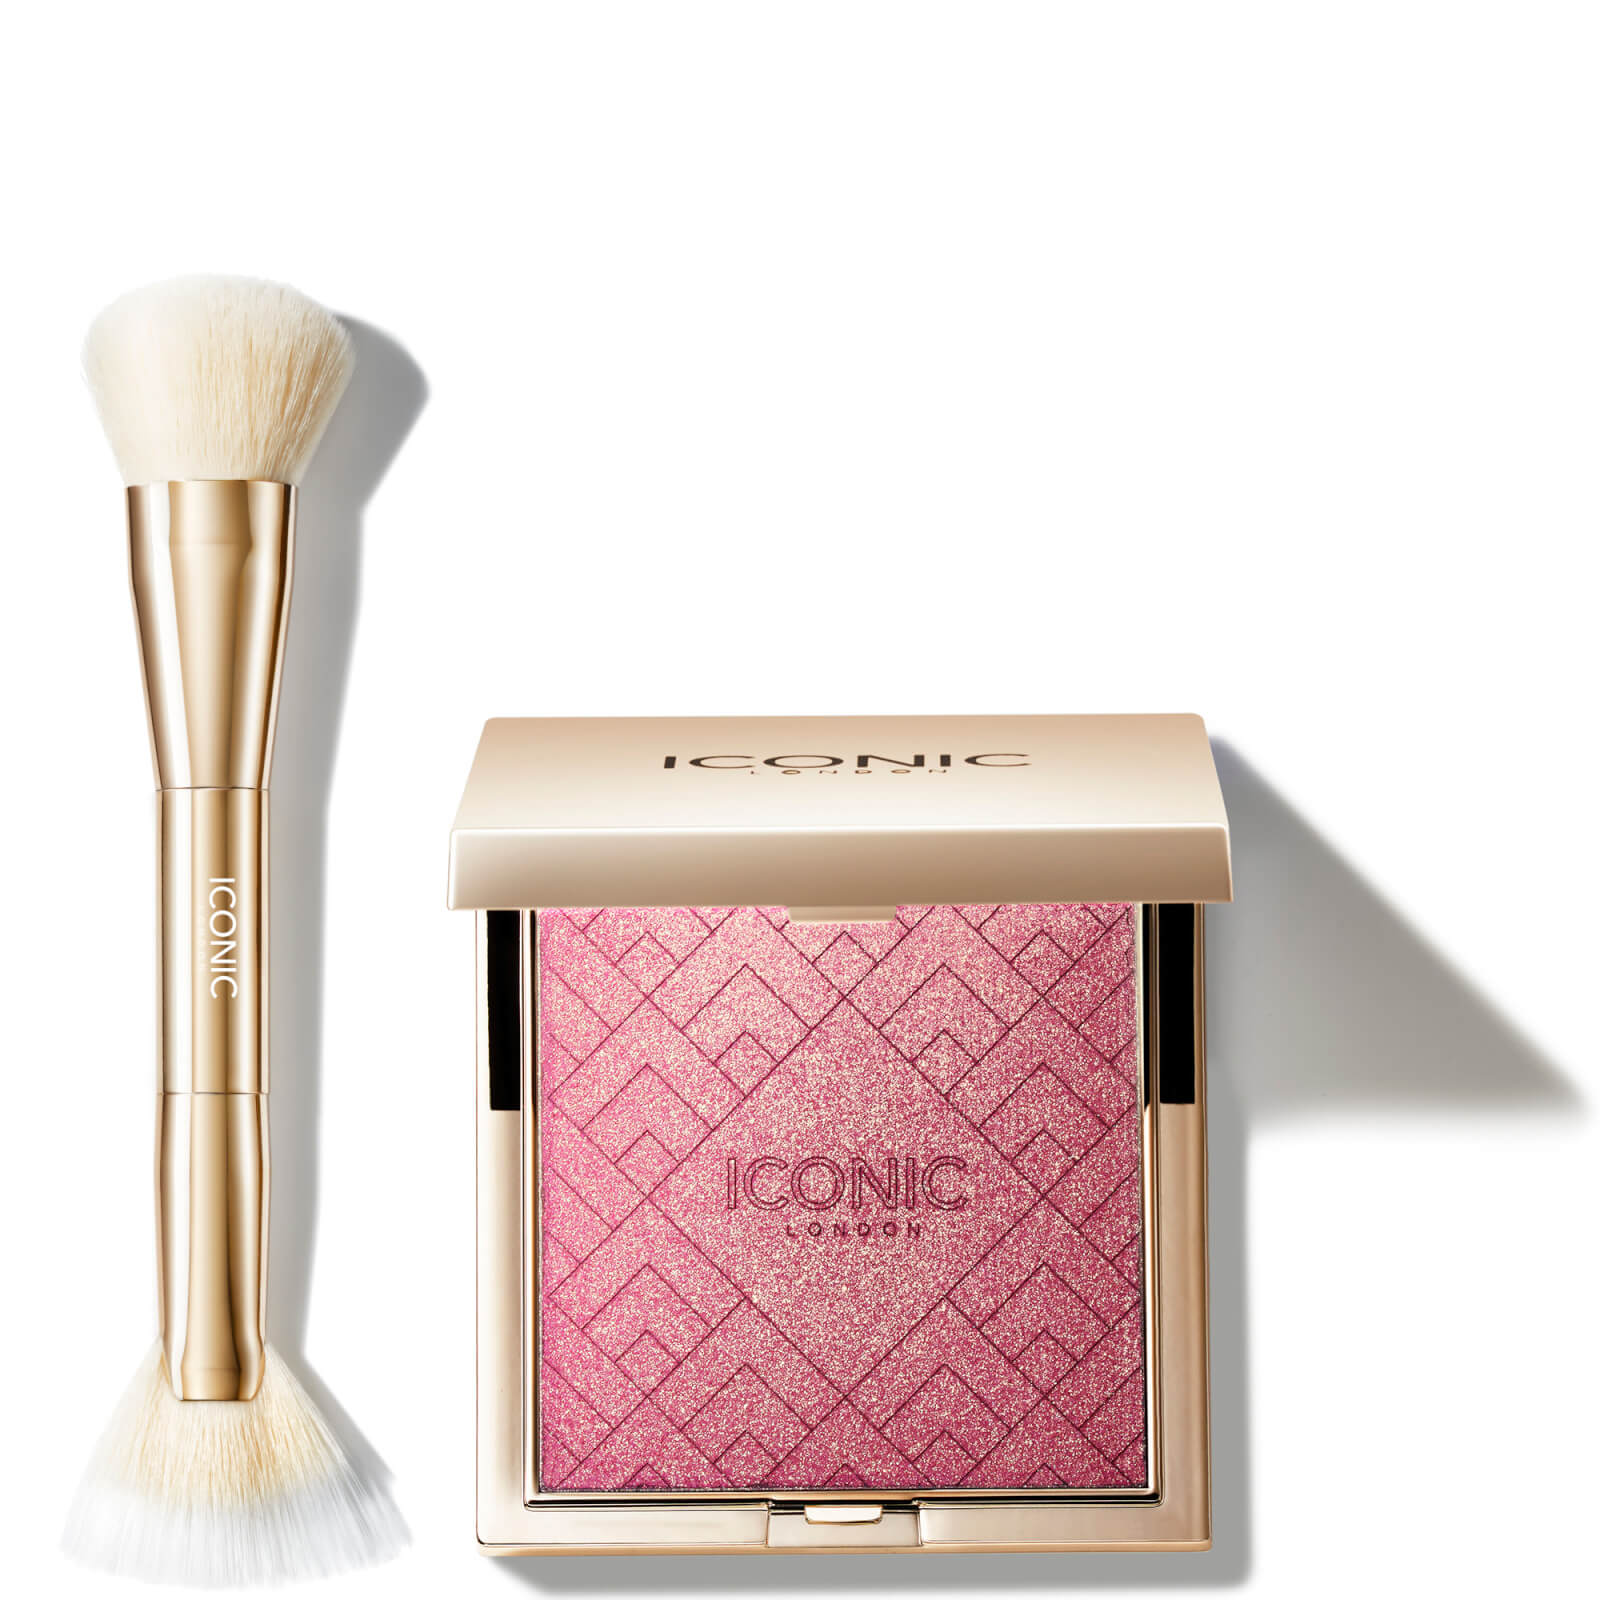 Iconic London Kissed By The Sun Multi-use Cheek Glow And Brush (various Shades) - Play Time